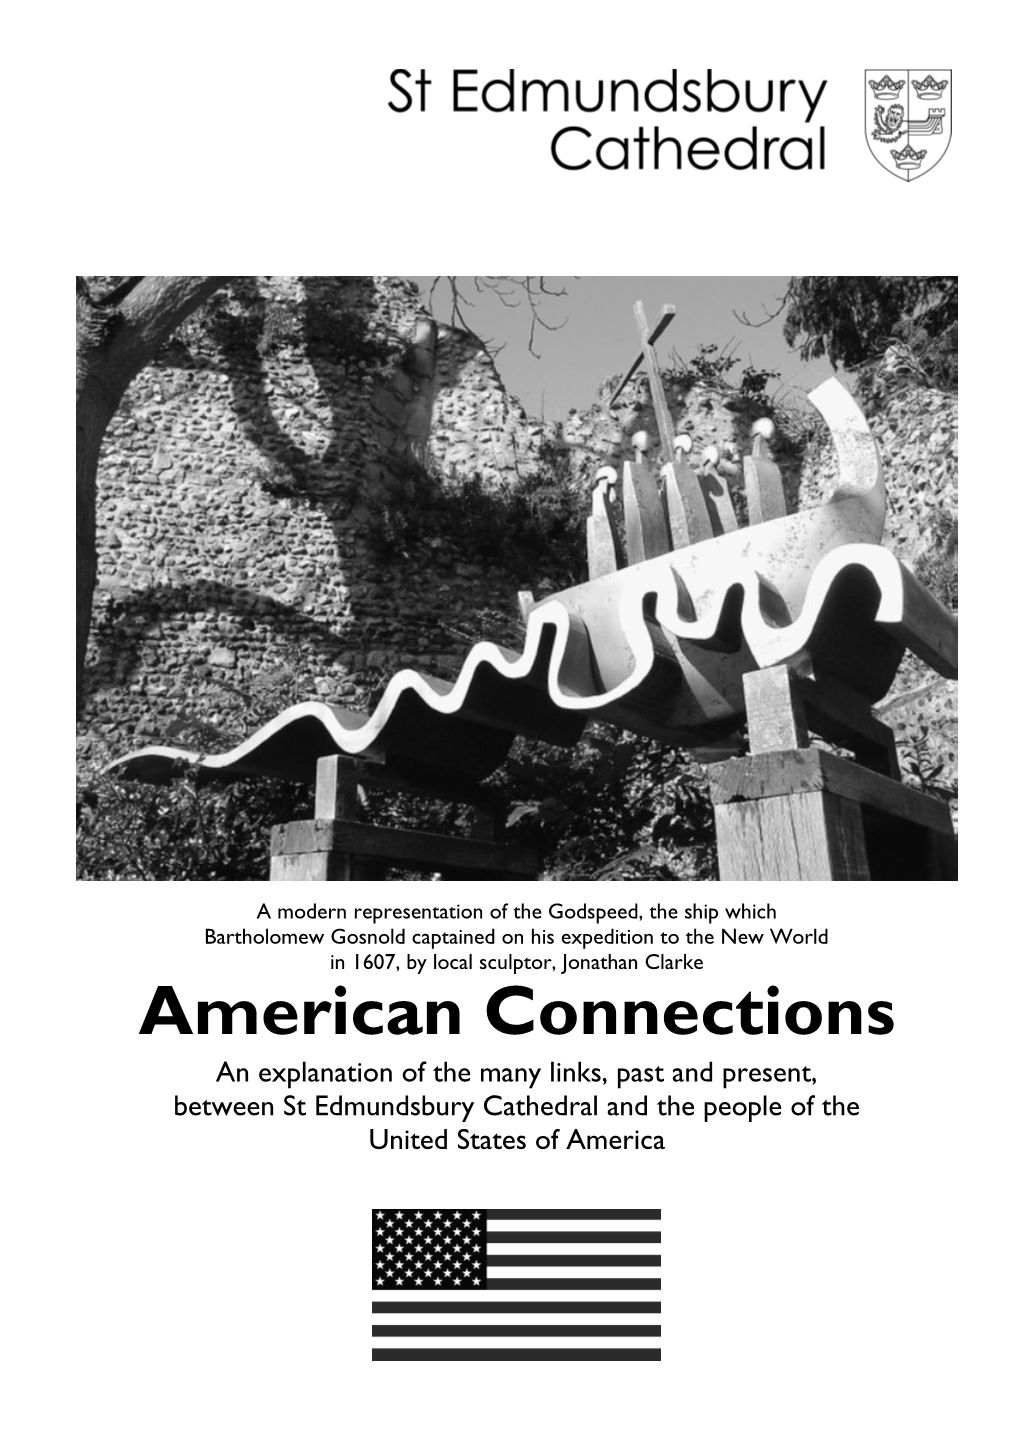 American Connections an Explanation of the Many Links, Past and Present, Between St Edmundsbury Cathedral and the People of the United States of America